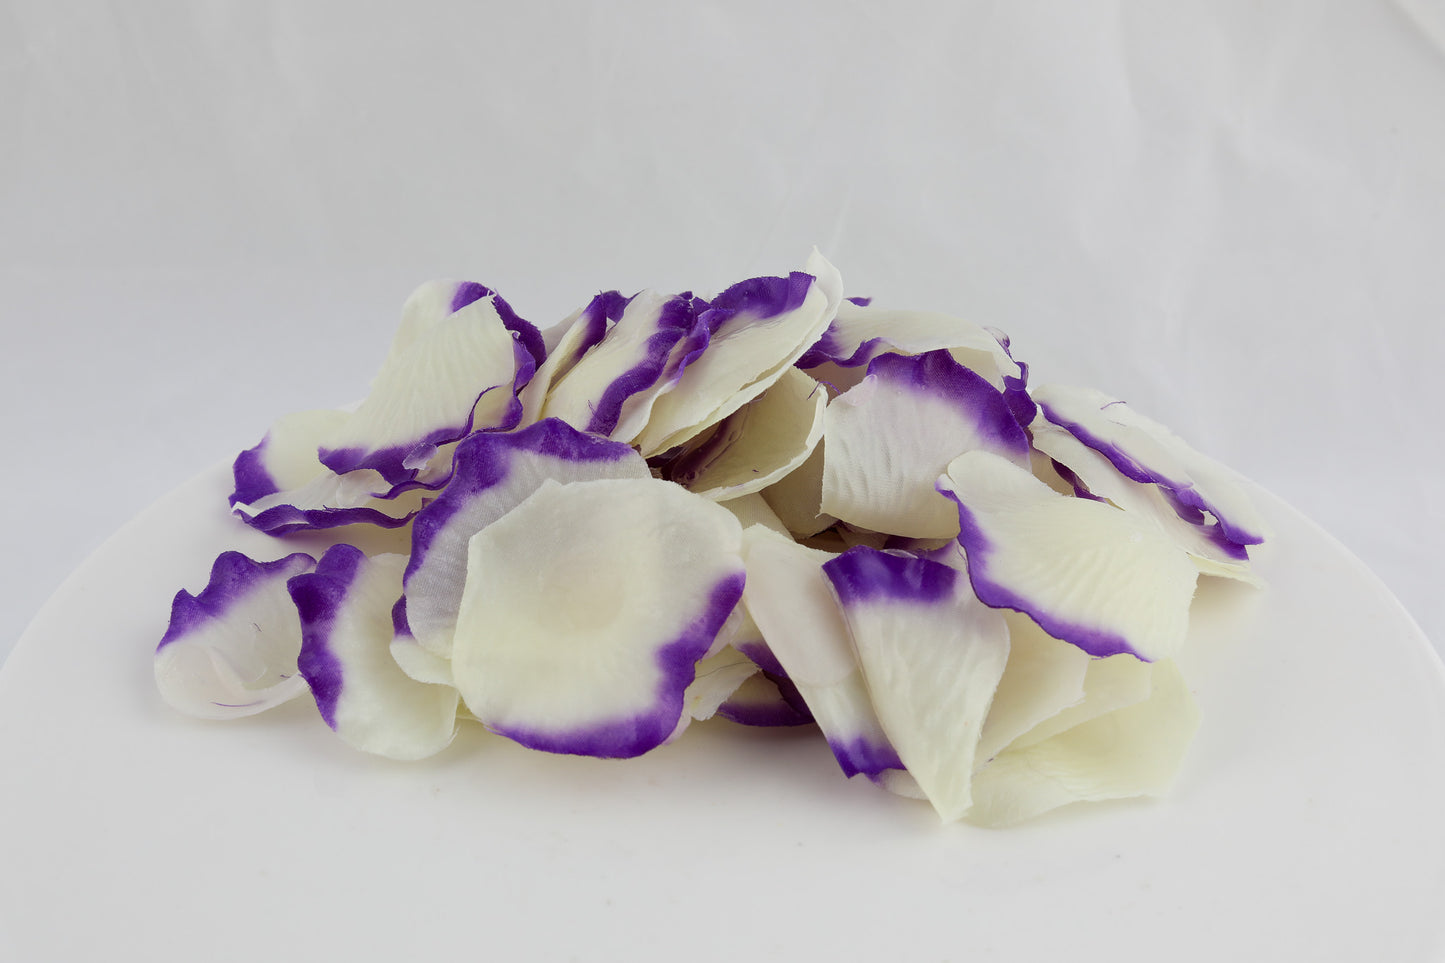 soap shaped as flower petals in cream with violet edges